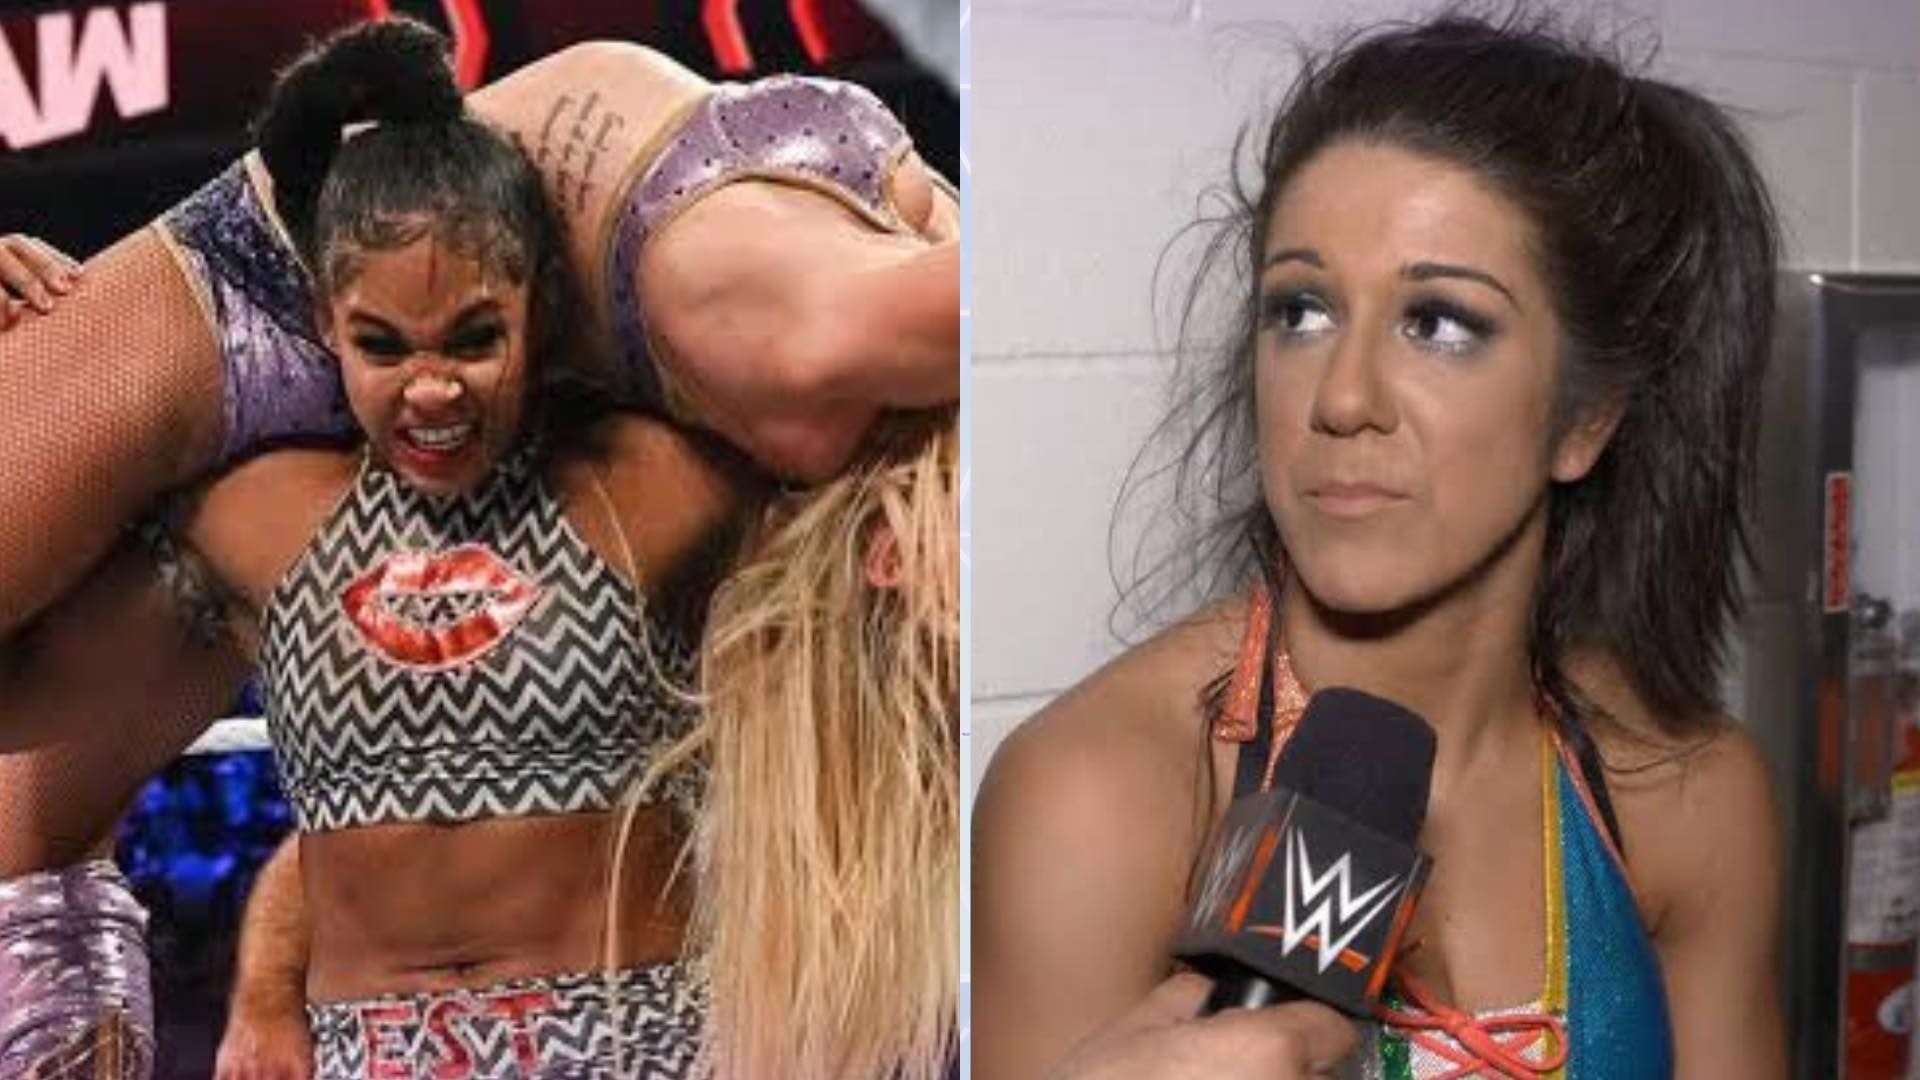 Bianca Belair is not happy with Bayley in WWE